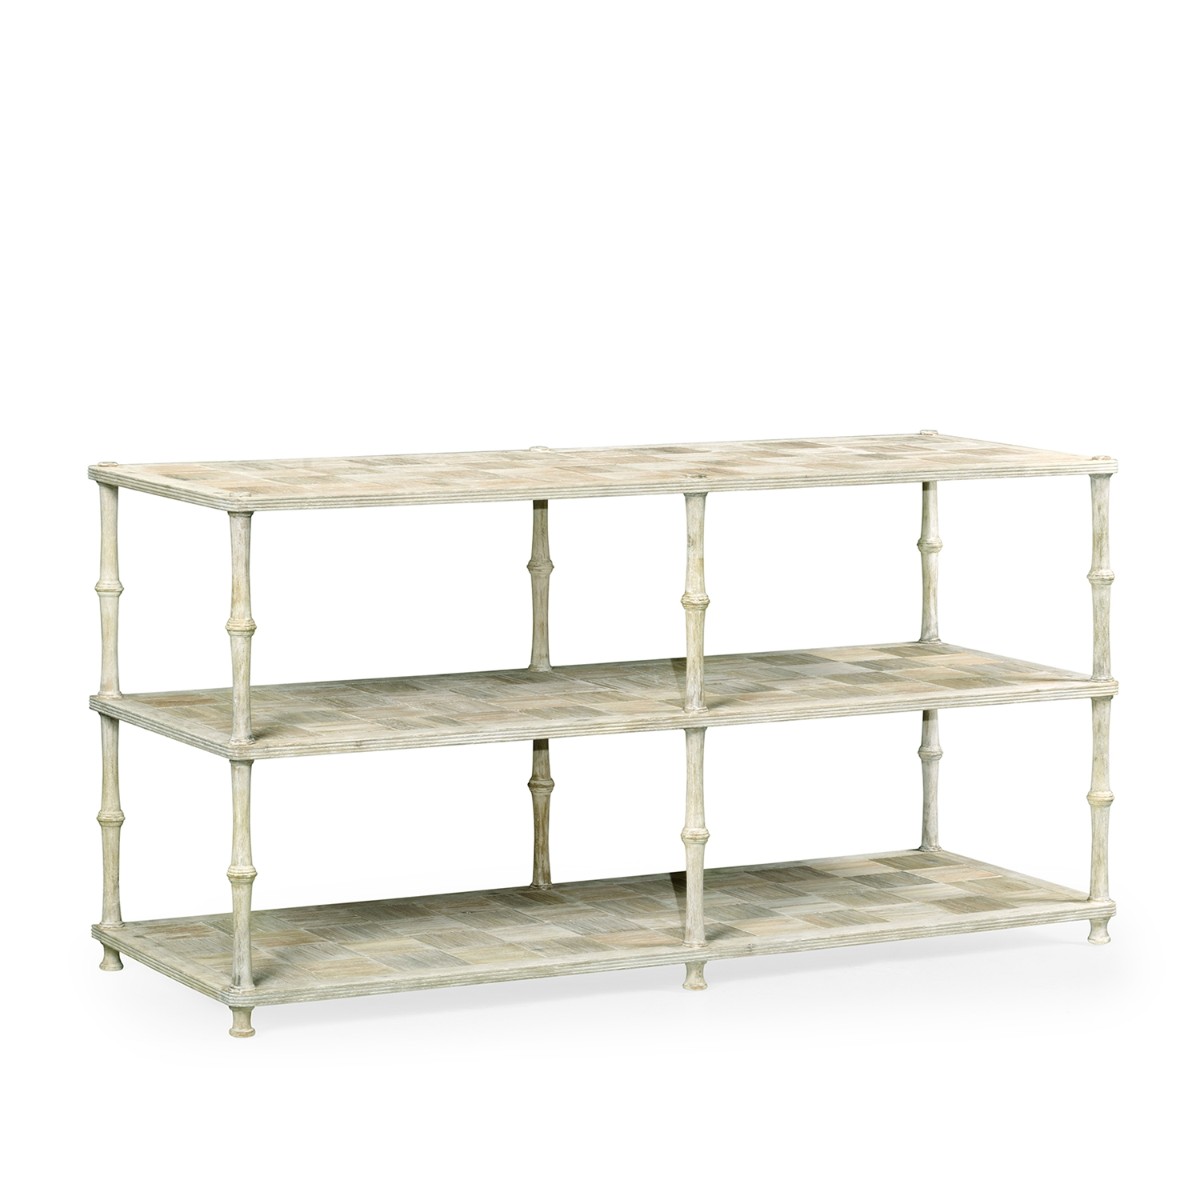 William Yeoward | Bywater Console Table Washed Acacia